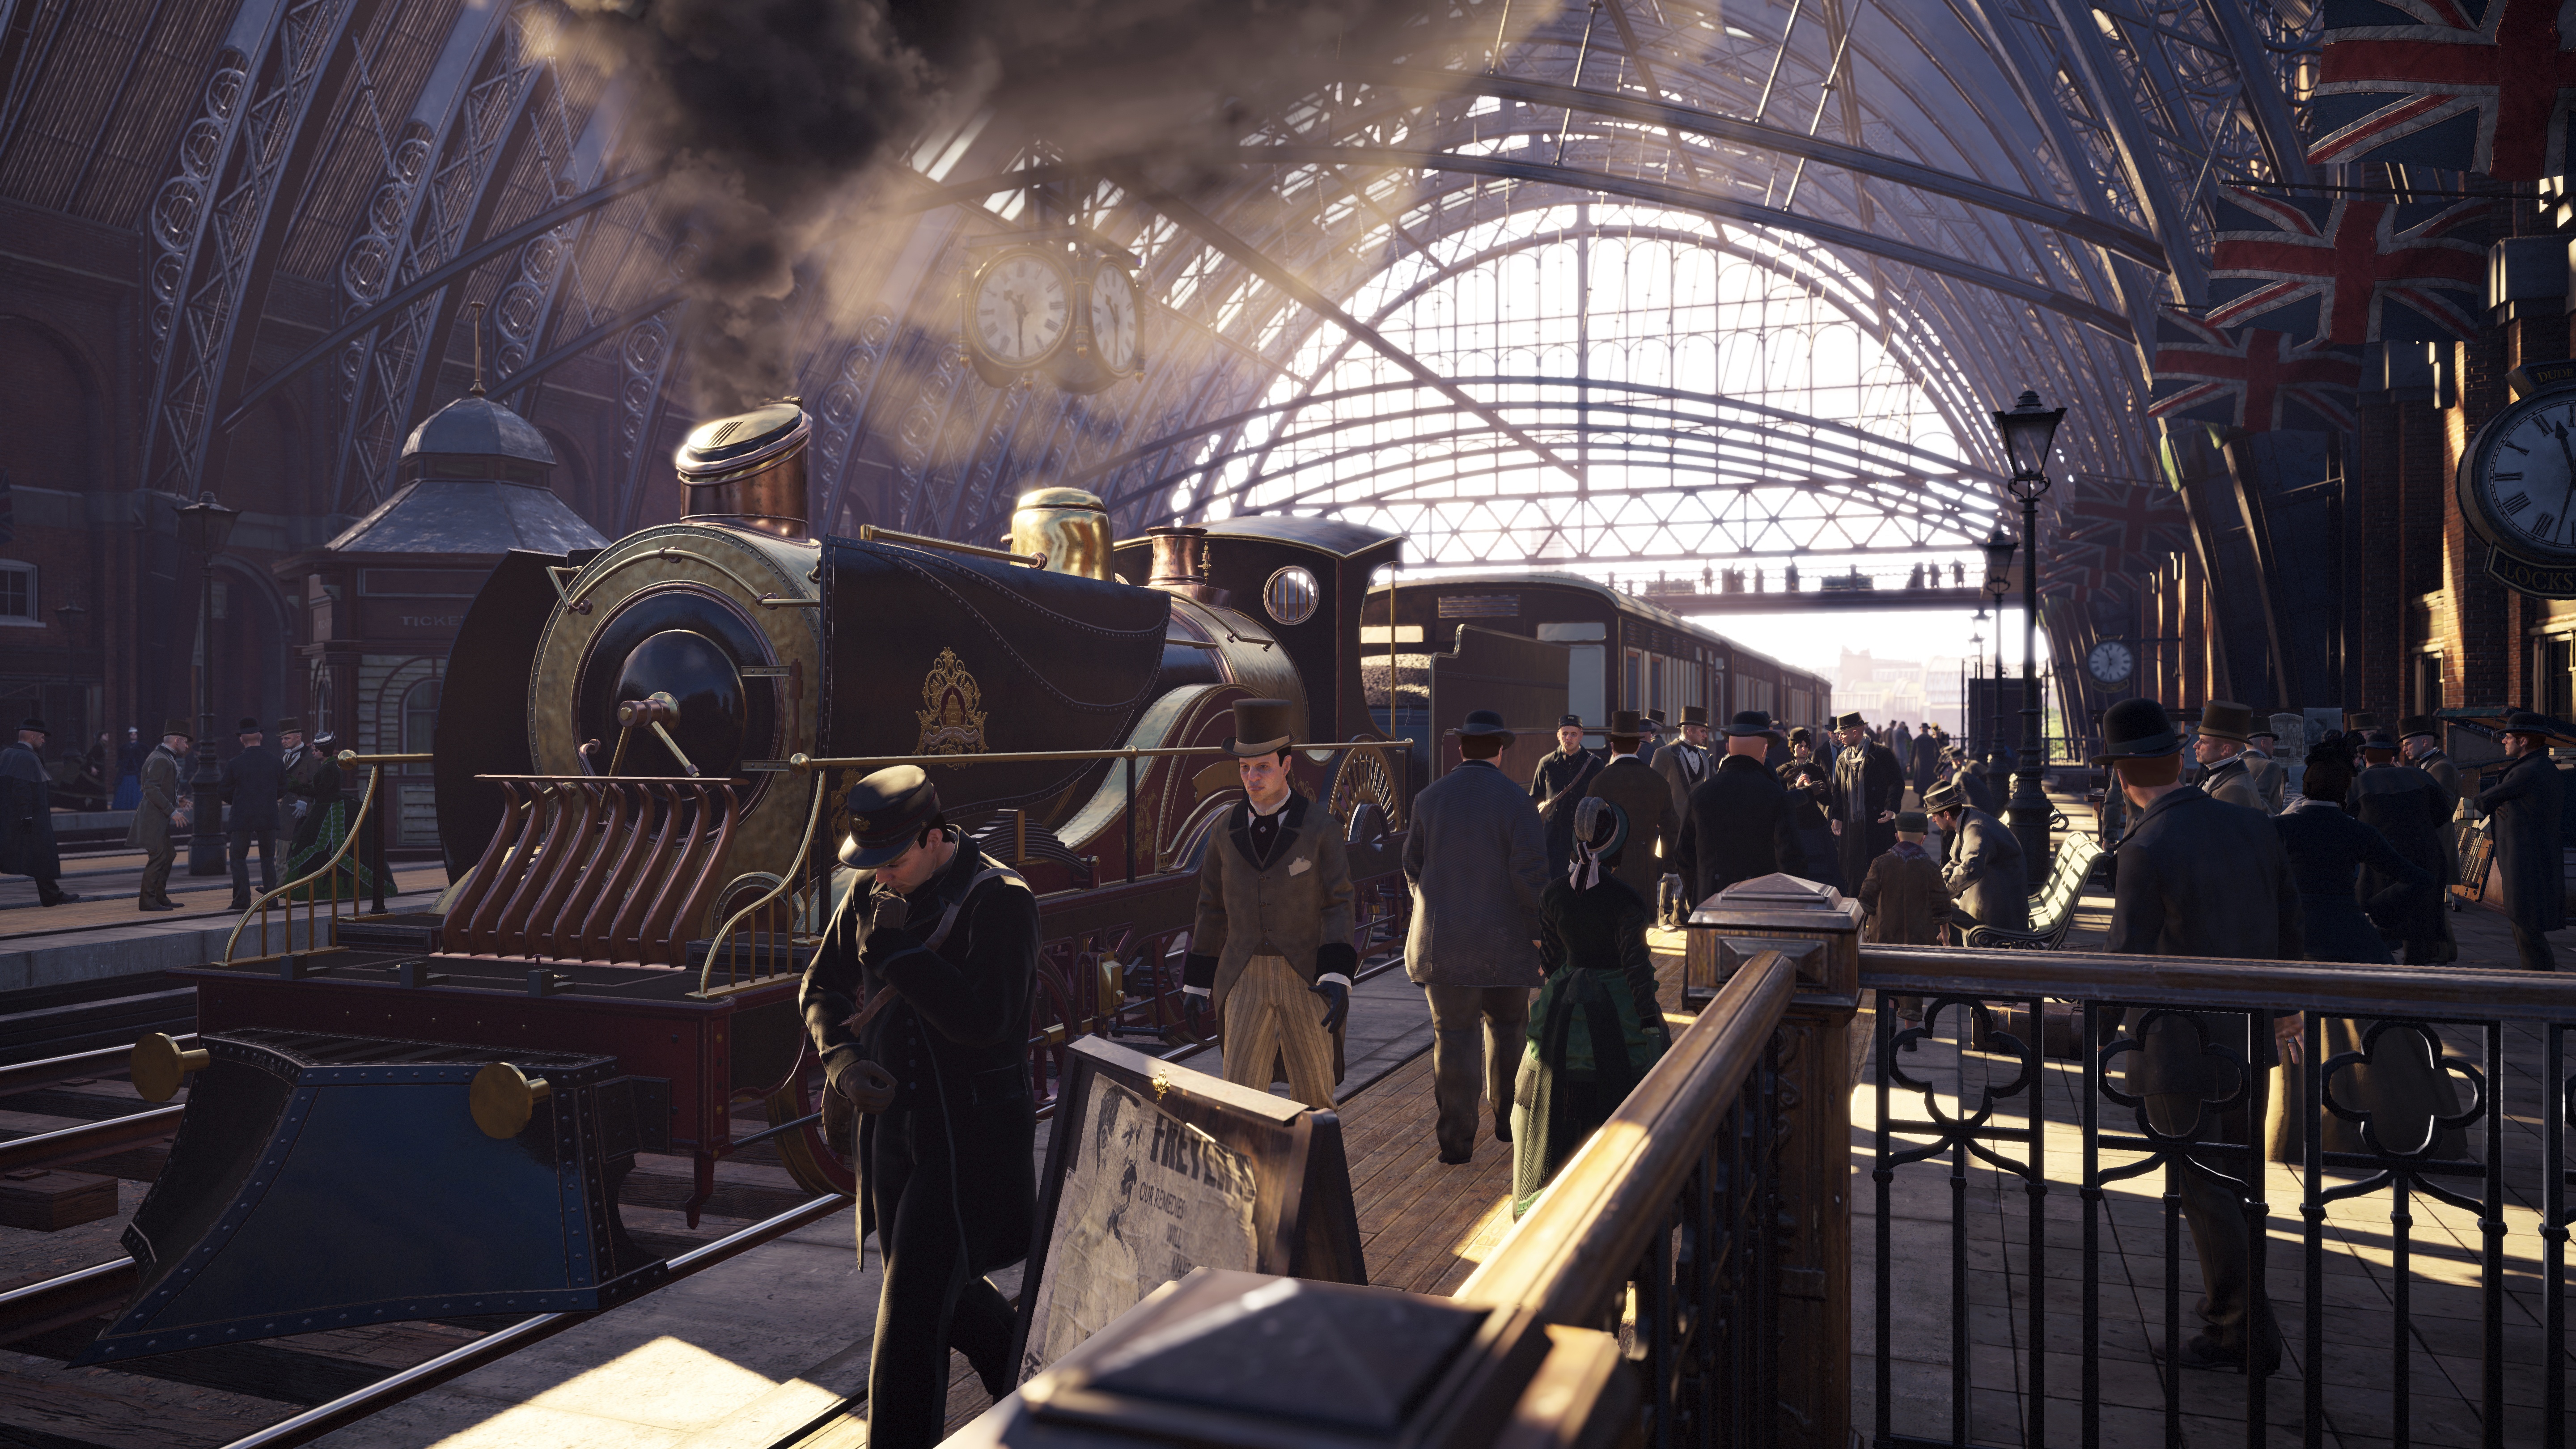 Download mobile wallpaper Assassin's Creed: Syndicate, Assassin's Creed, Video Game for free.